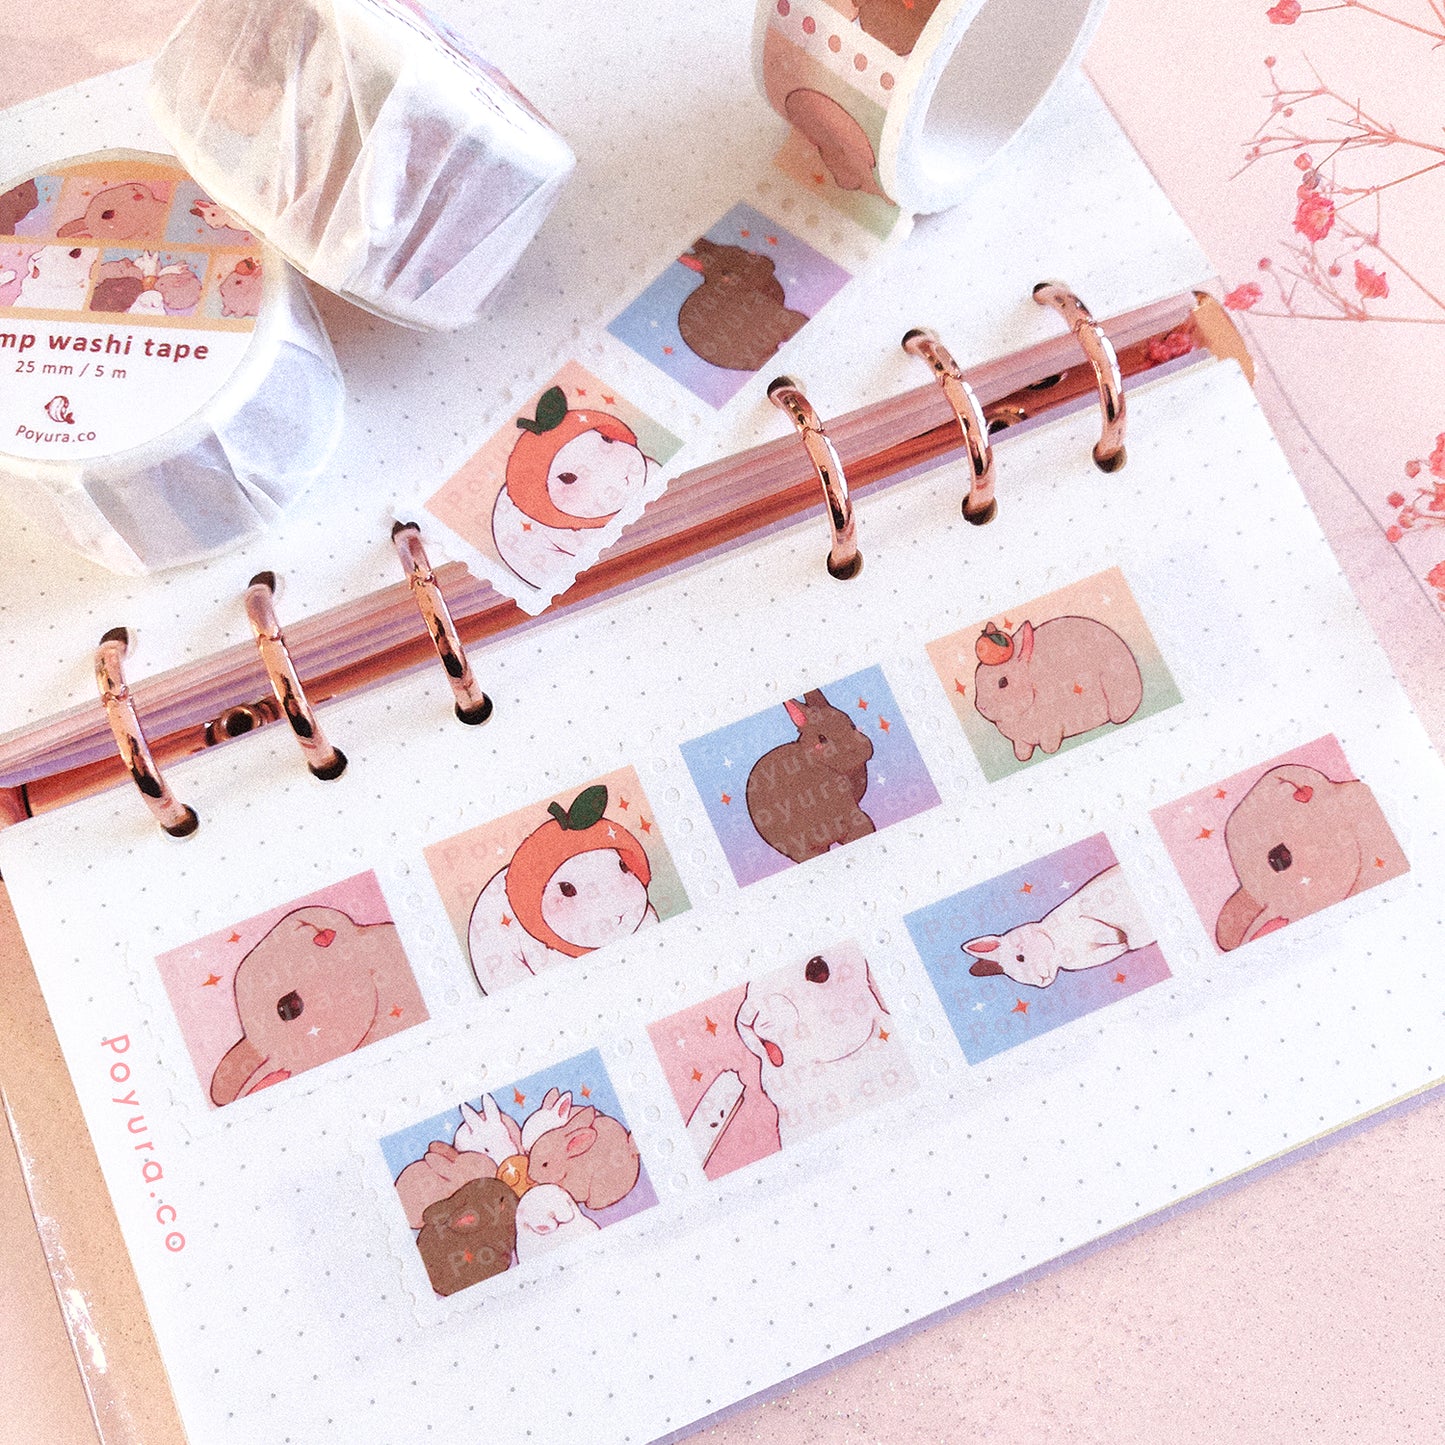 Lunar new year bunny rabbit animal zodiac sign Asian 2023 Chinese Japan Korea oriental holiday deco tiny small orange food luck aesthetic cute polco kpop journal toploader sticker stamp washi tape